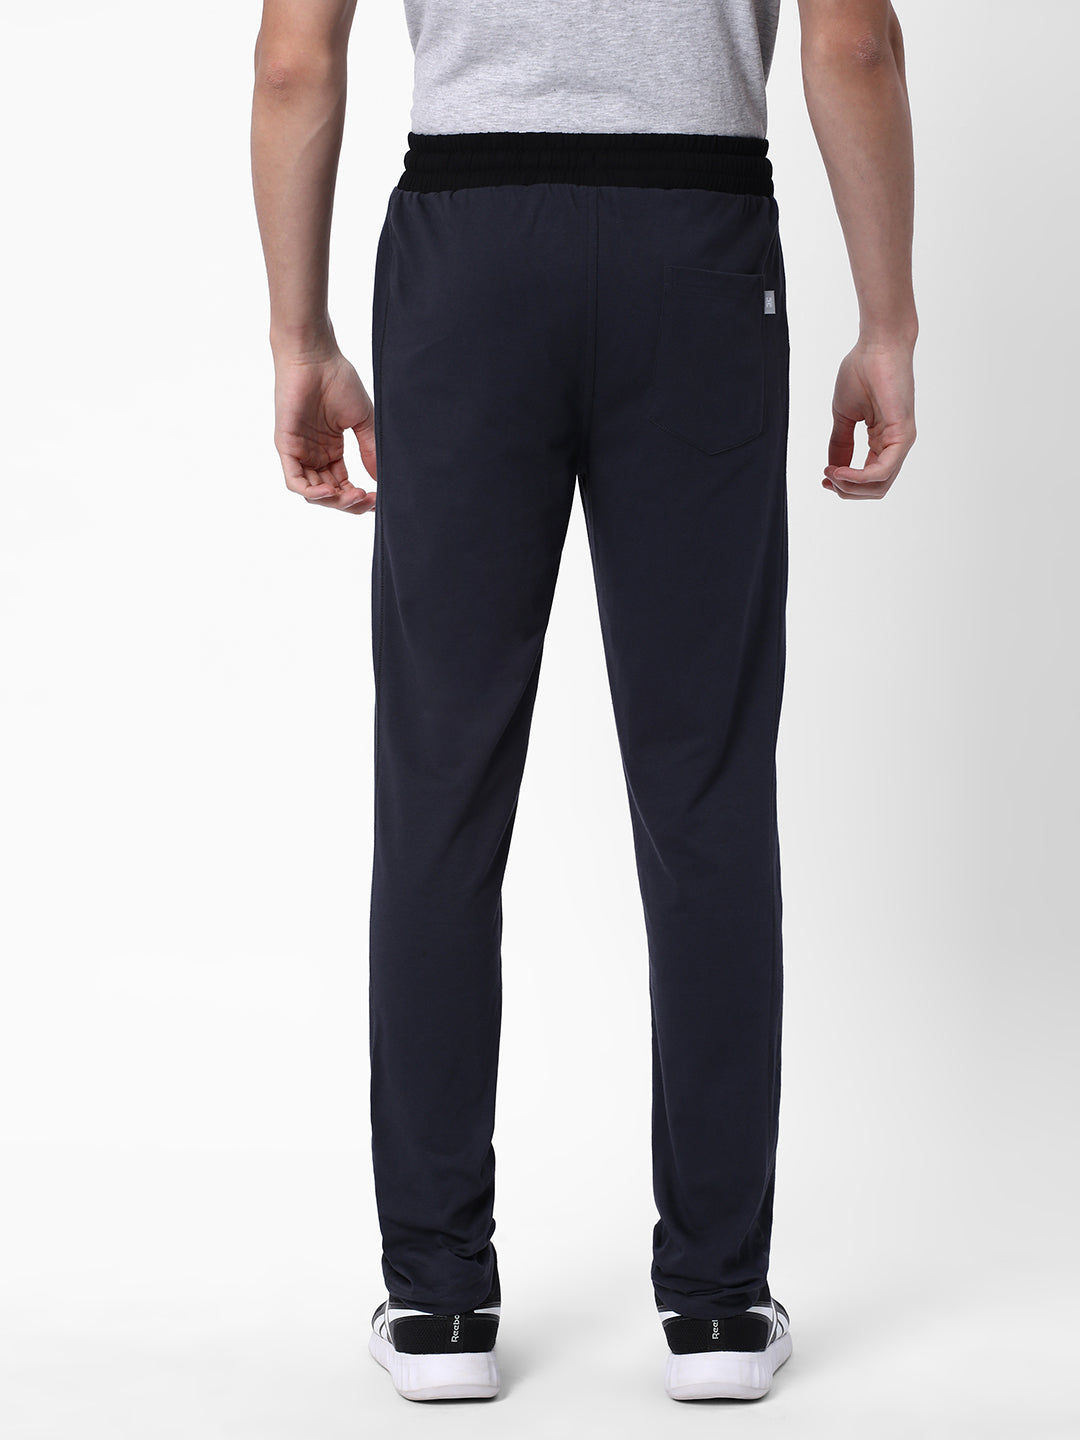 Buy Under Armour Men's UA Woven Track Pants at Ubuy India